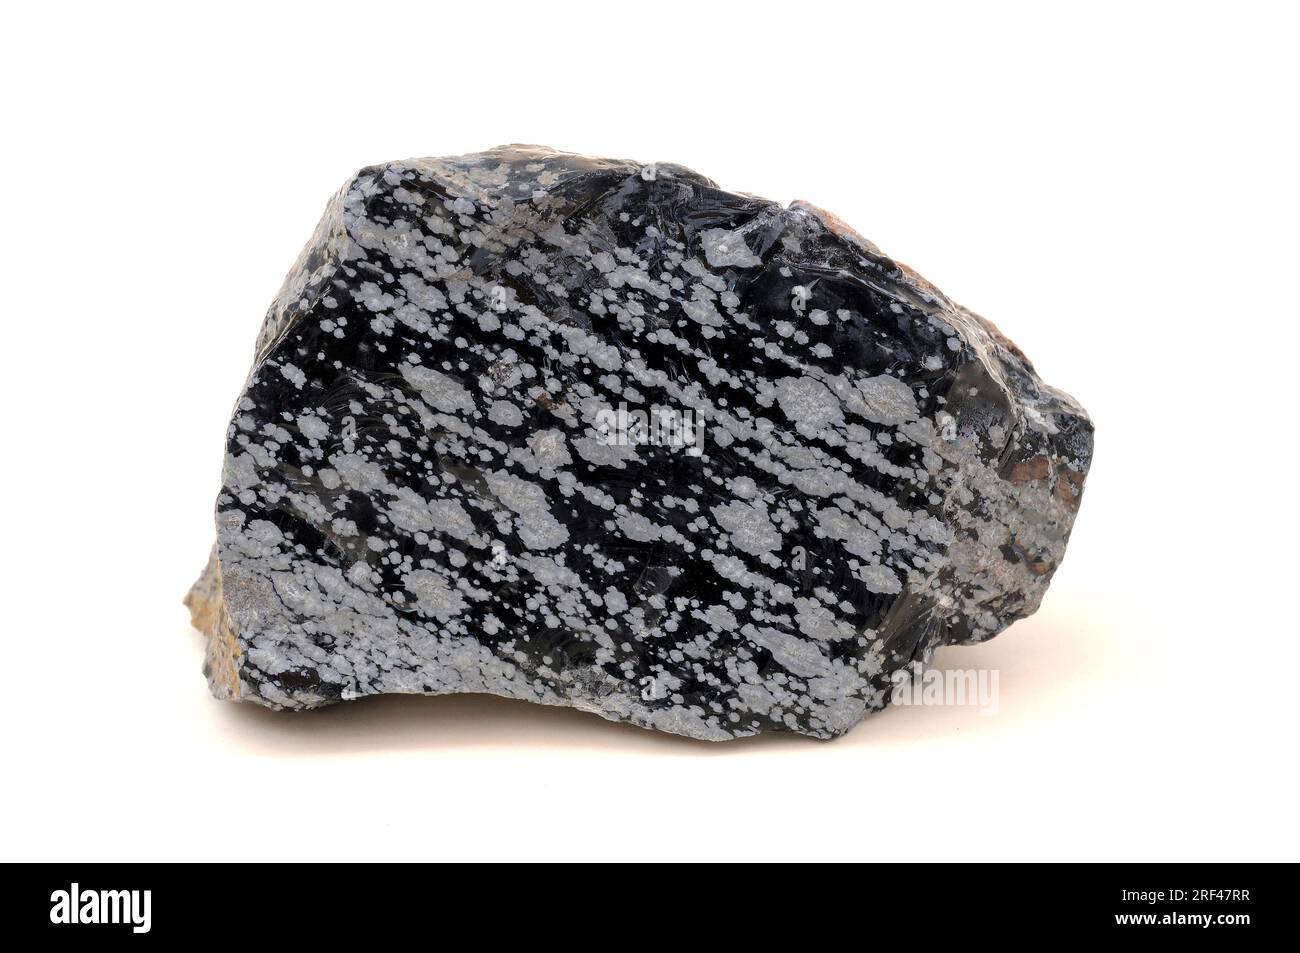 Snowy obsidian is a volcanic glass rock with conchoidal fracture. This sample comes from Mexico. Stock Photo